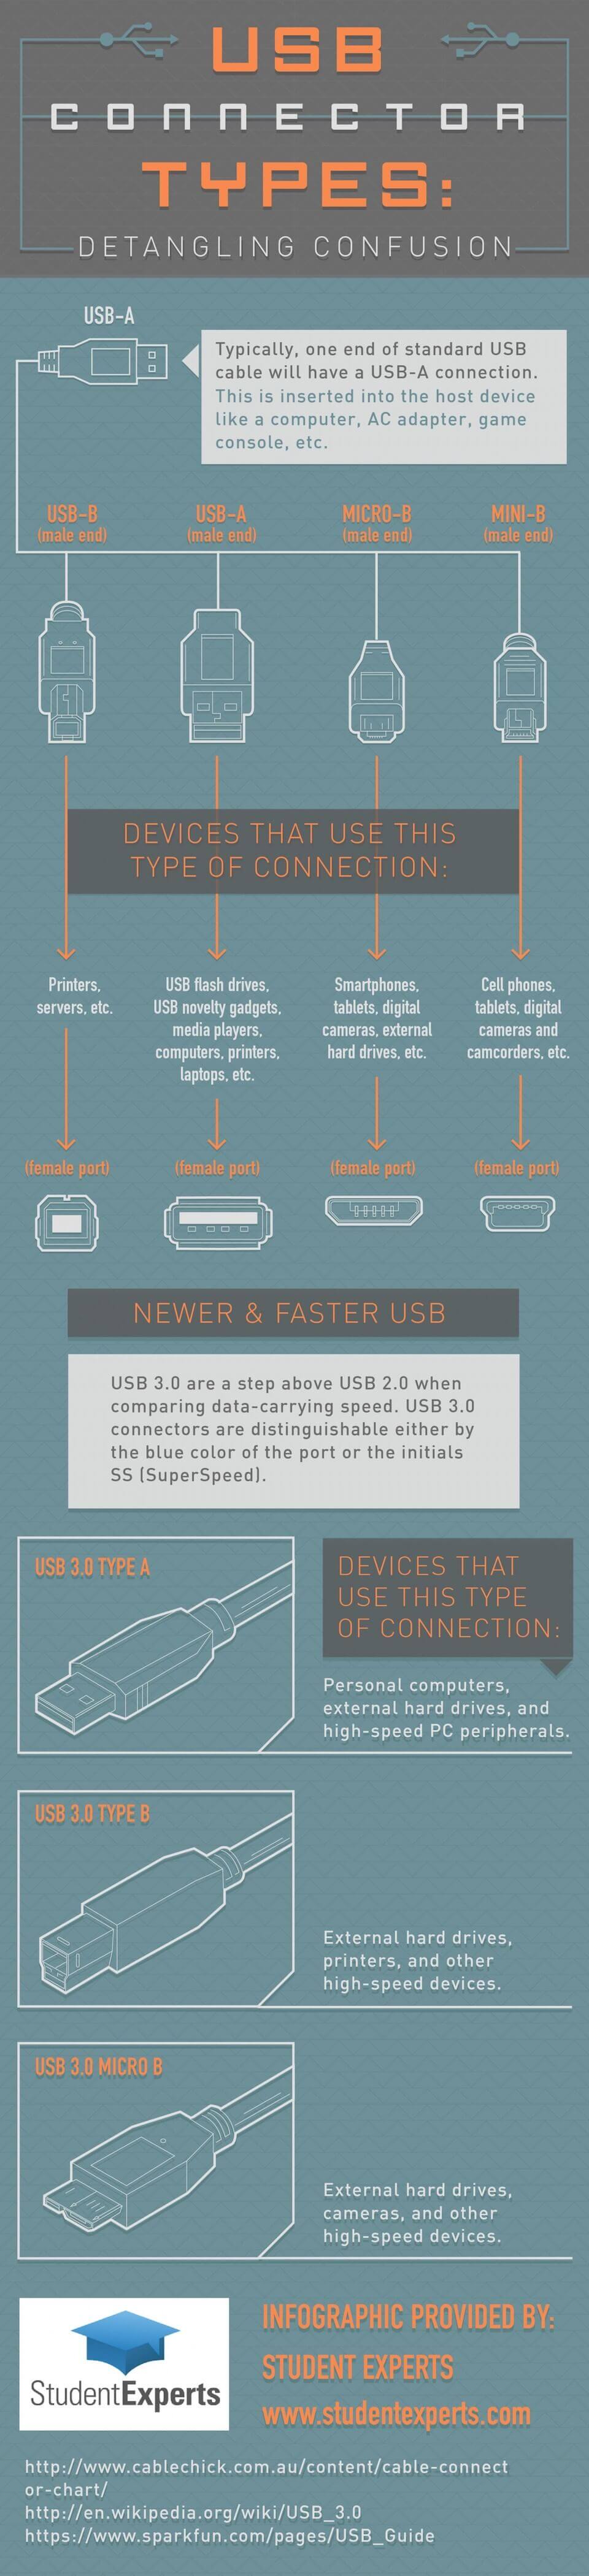 An infographic of USB connector types